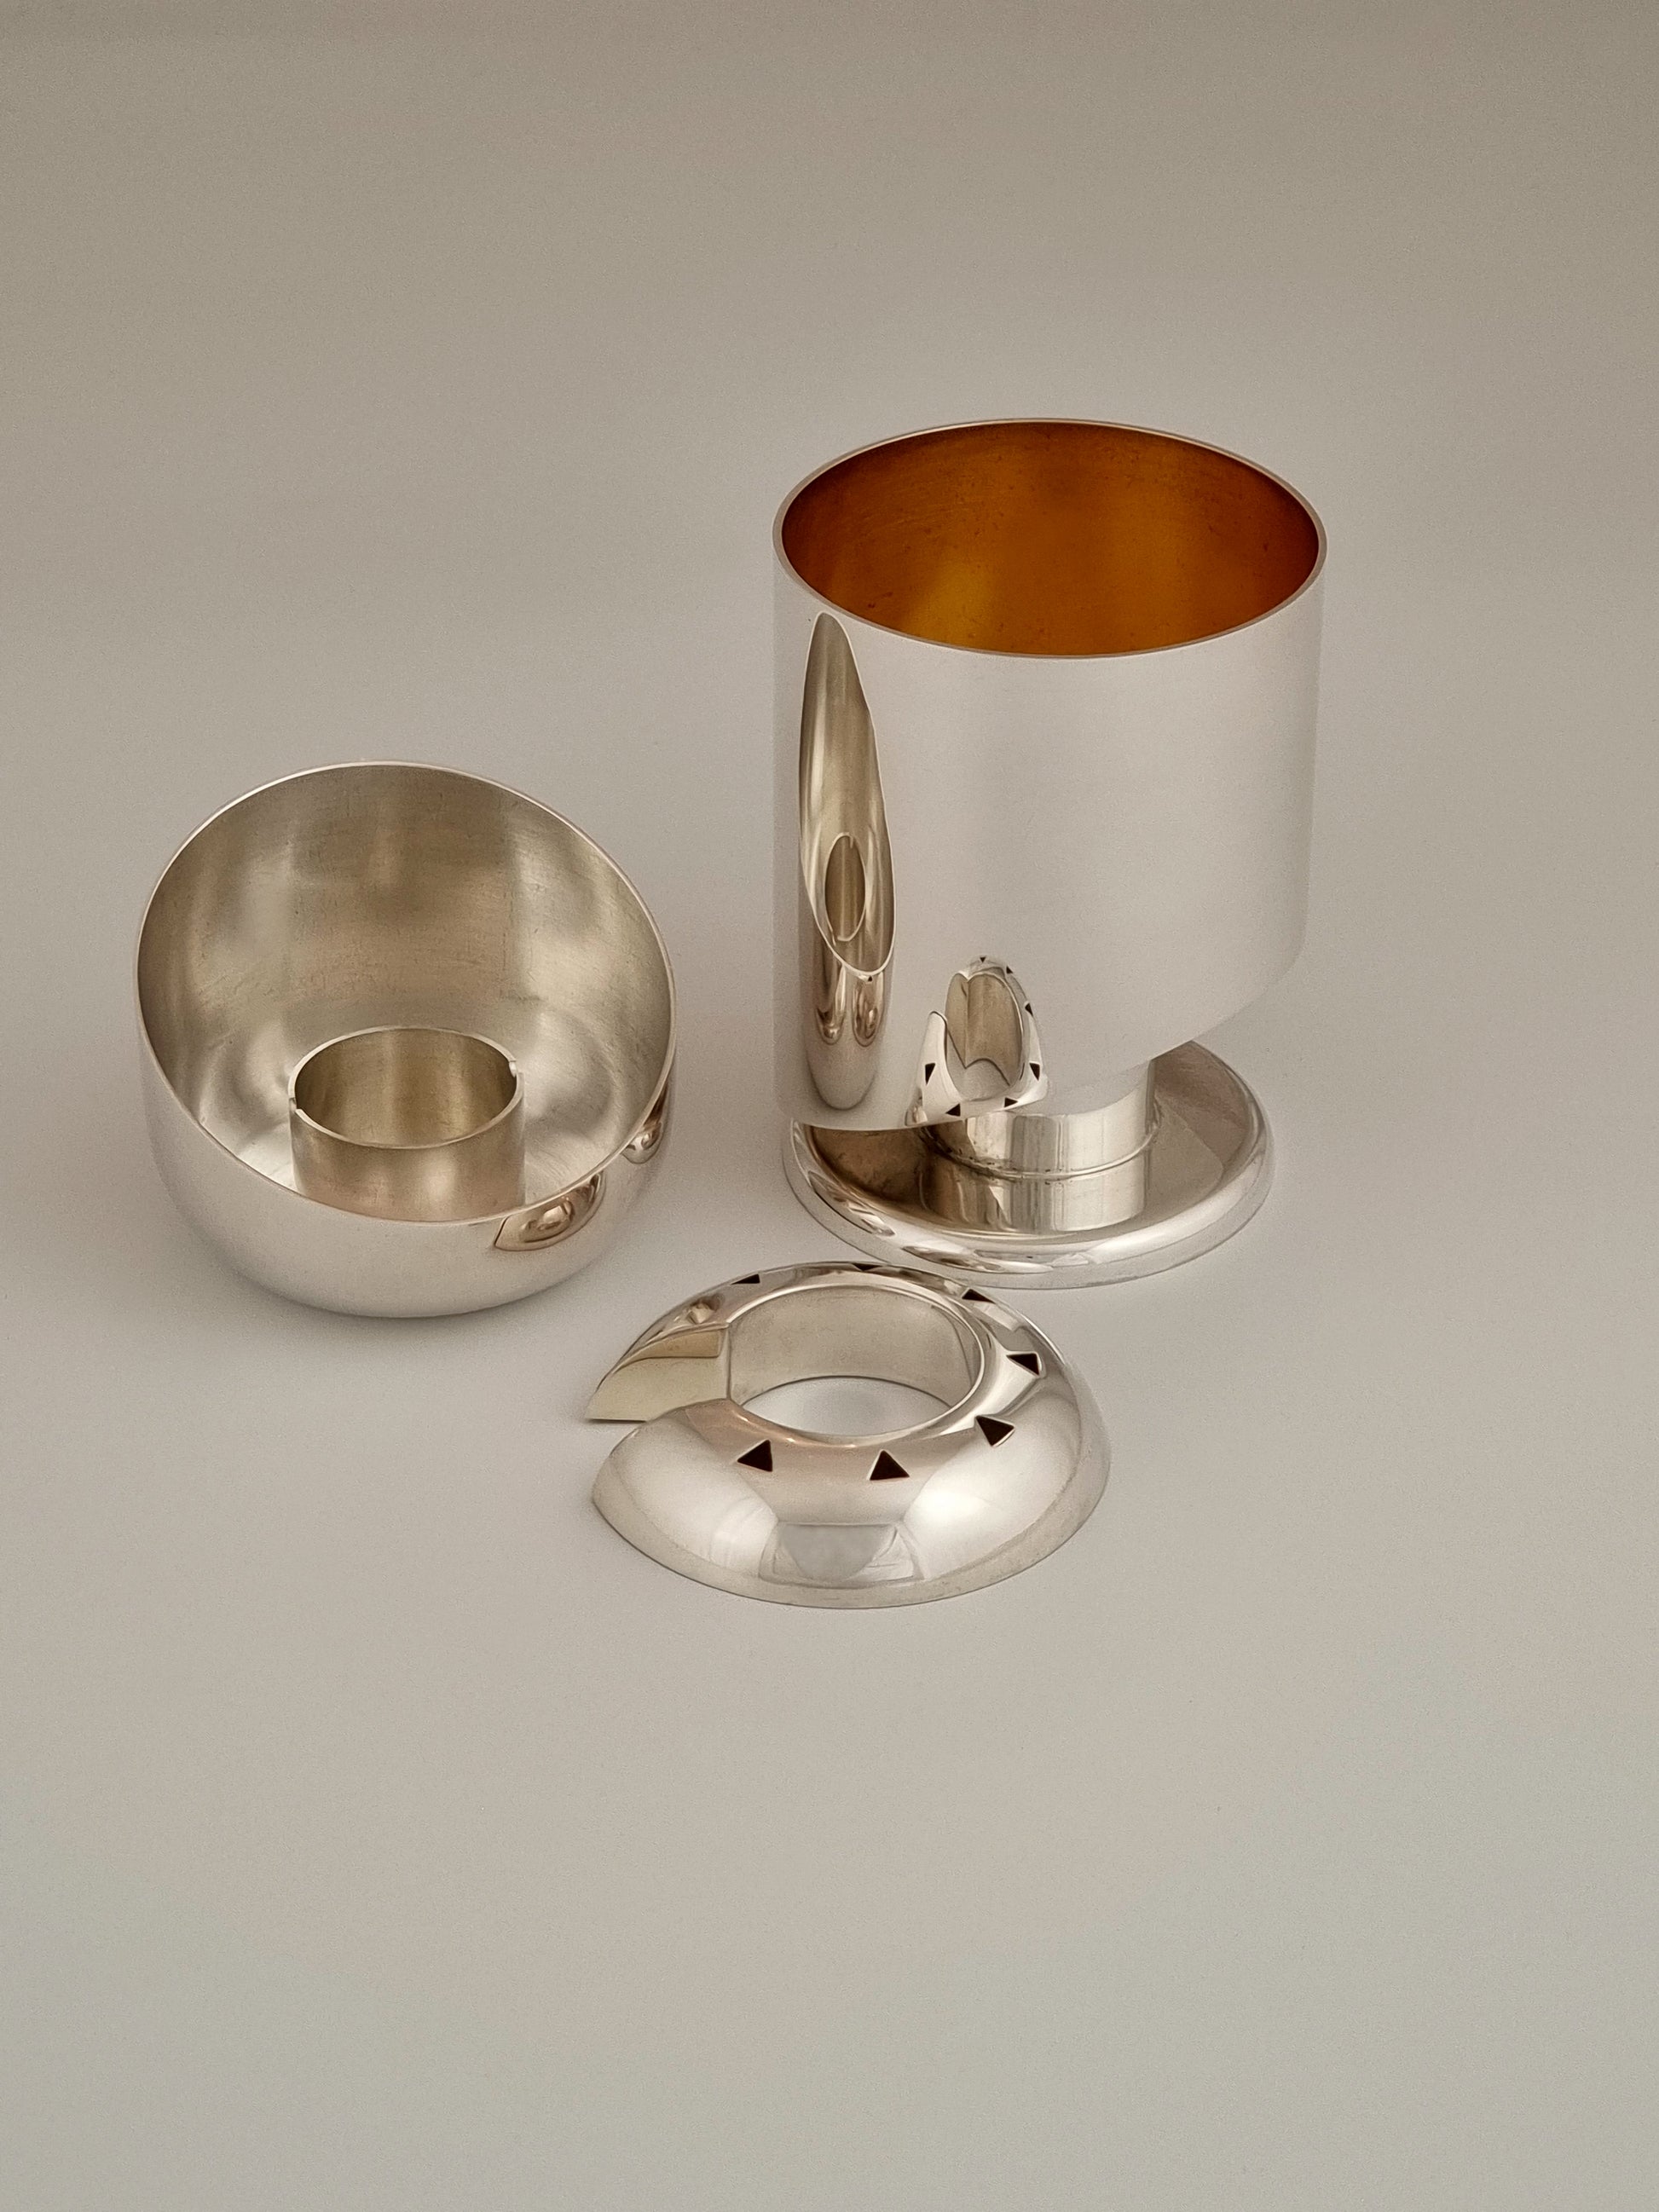 Havdalah set comprised of a Kiddush cup, spice box and candle holder.